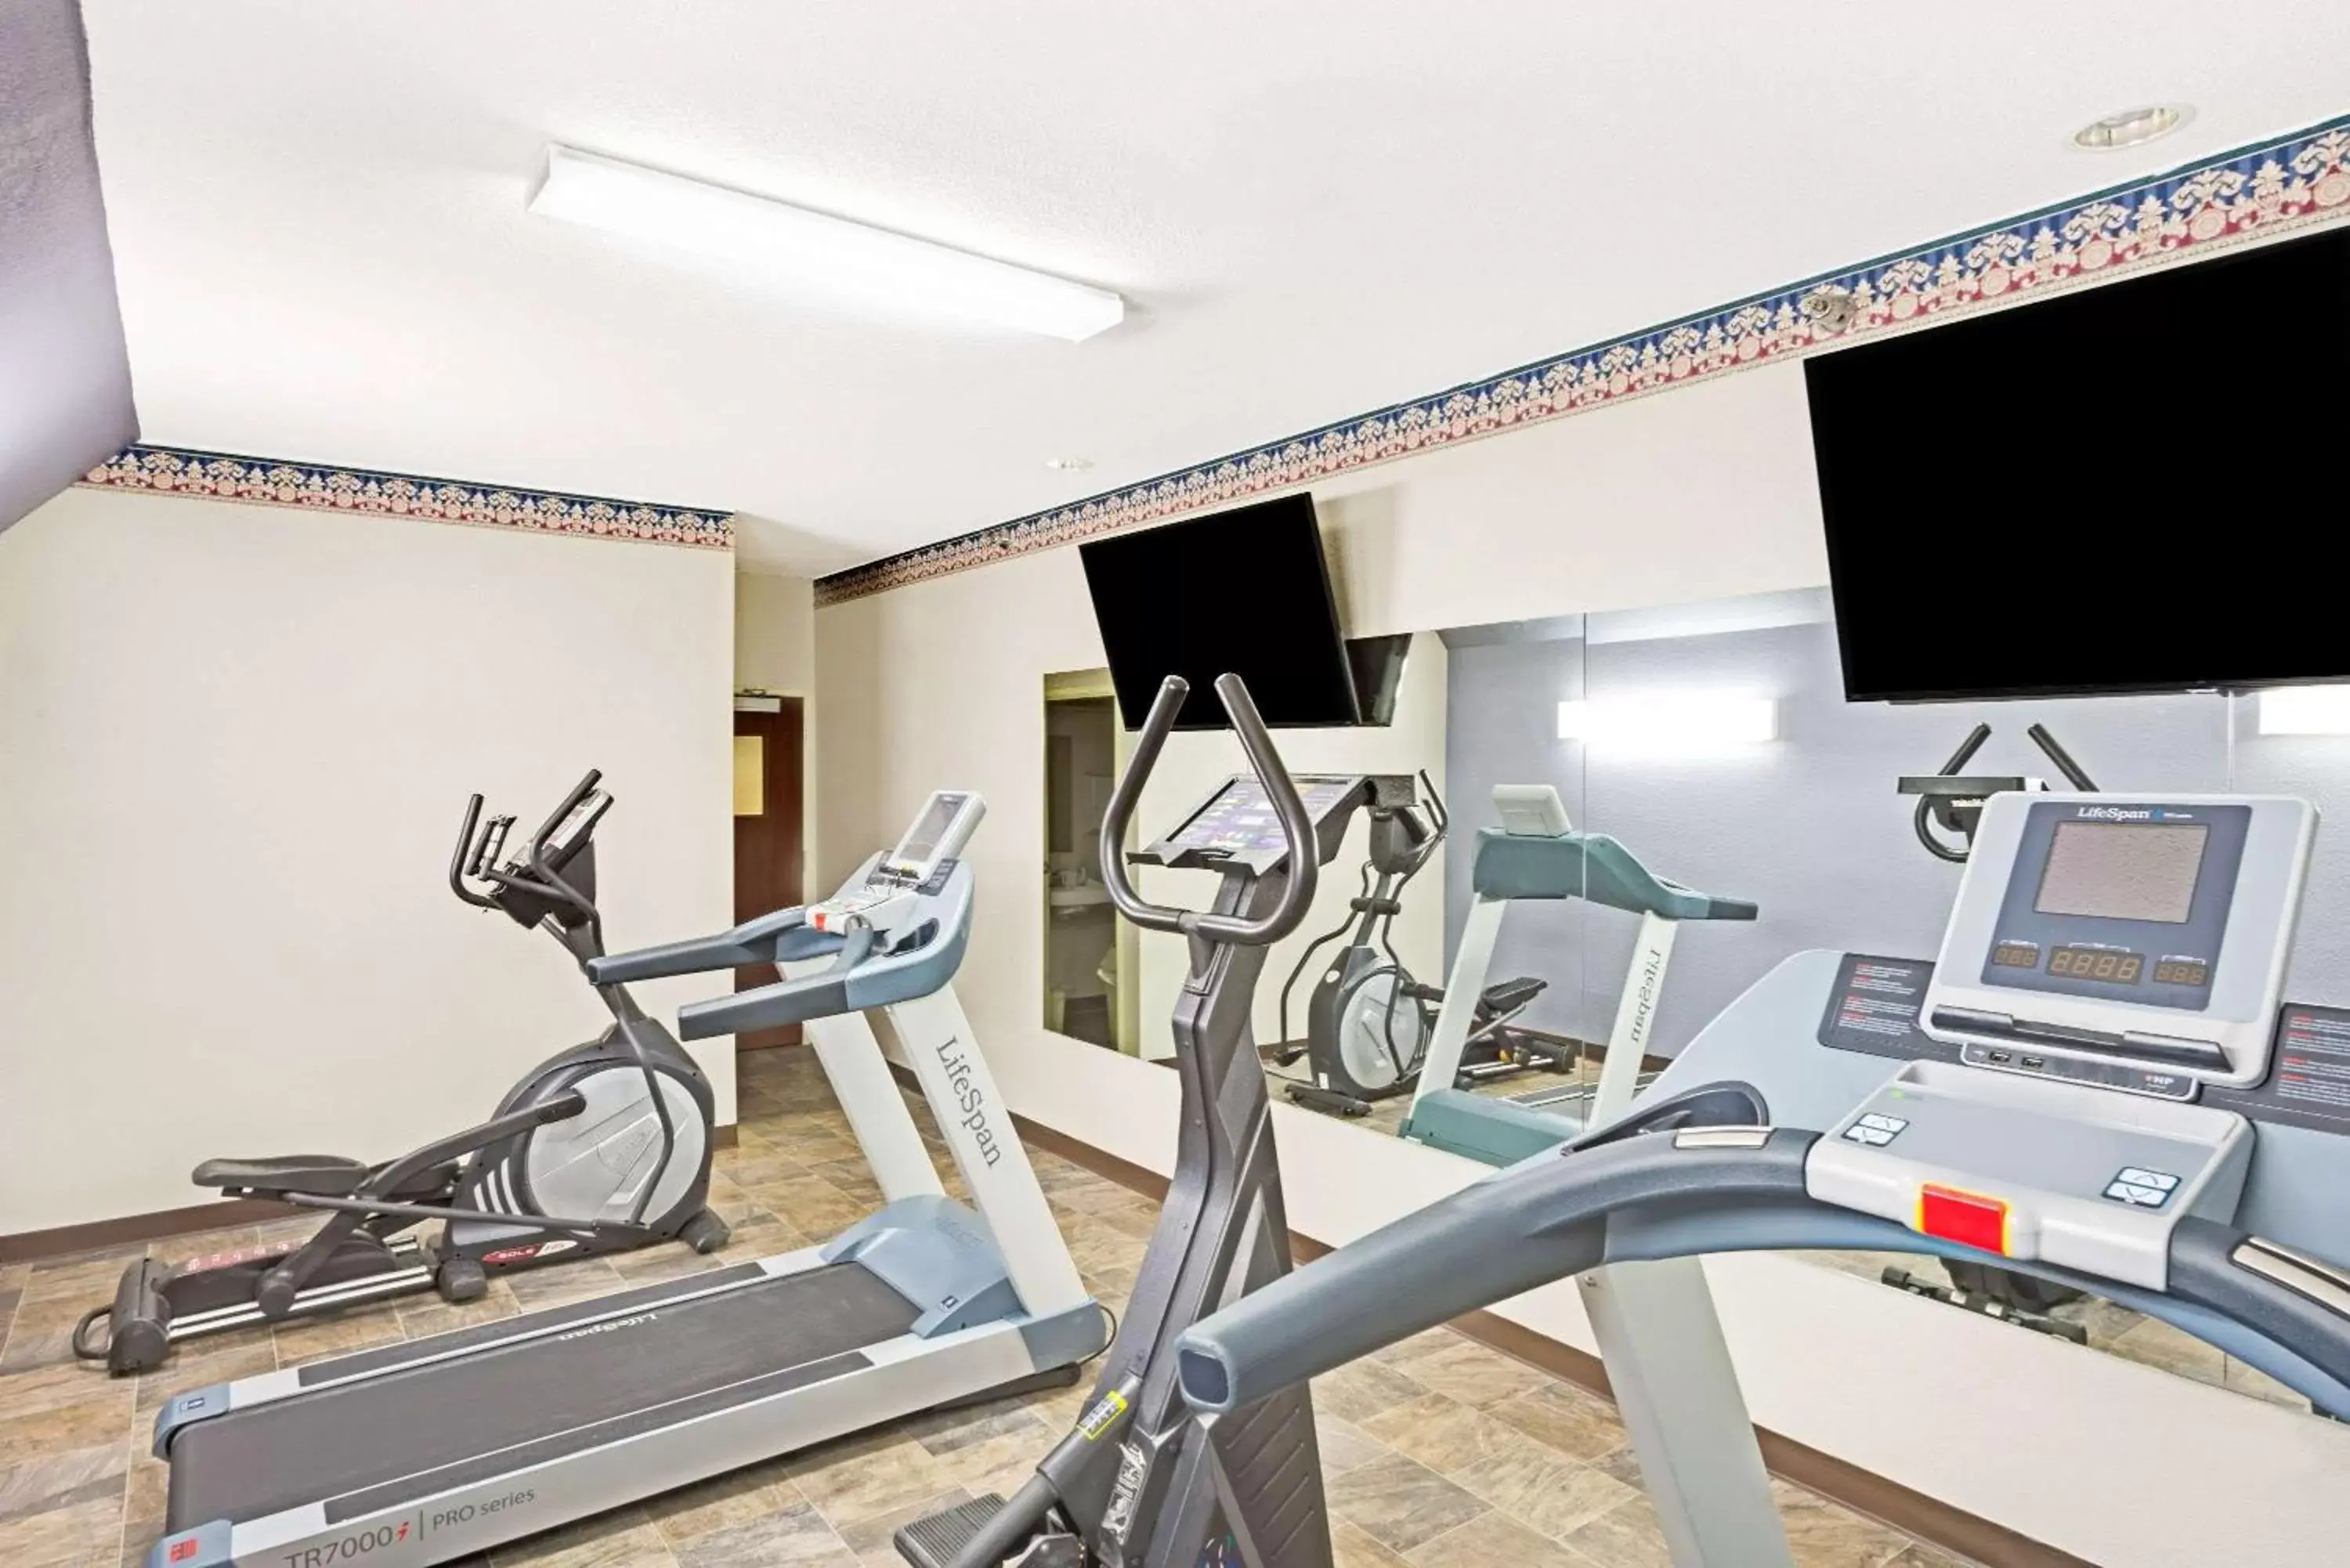 Fitness centre/facilities, Fitness Center/Facilities in Microtel Inn & Suites Urbandale